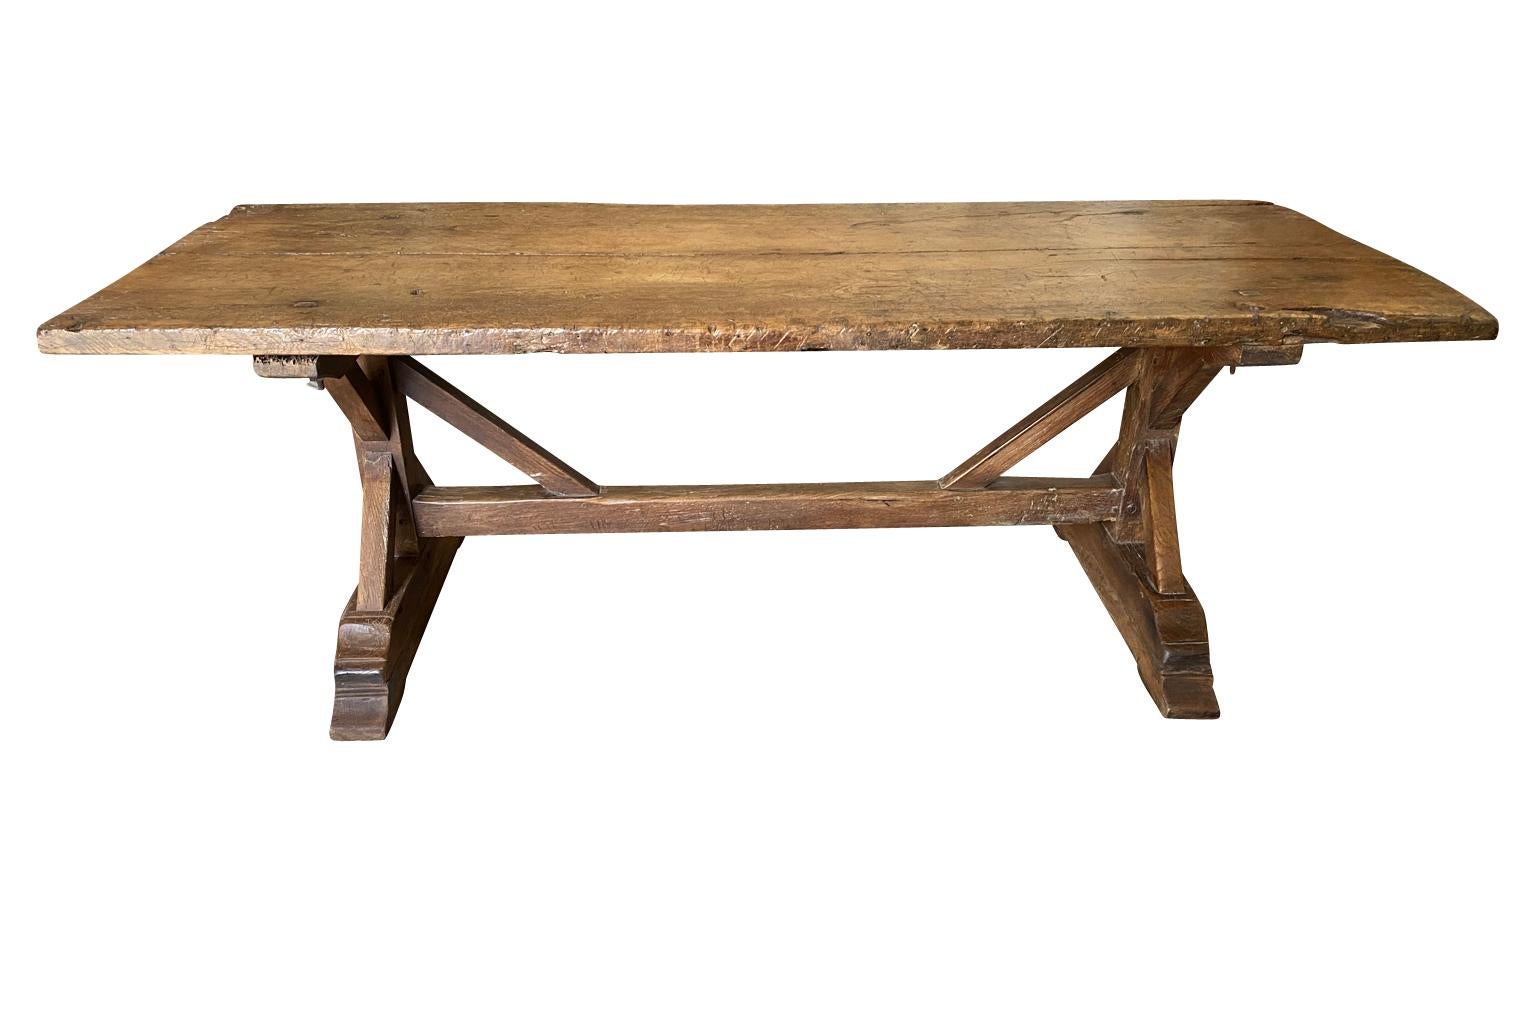 A very handsome early 19th century Farm Table - Trestle Table beautifully constructed from richly stained oak with wonderful 